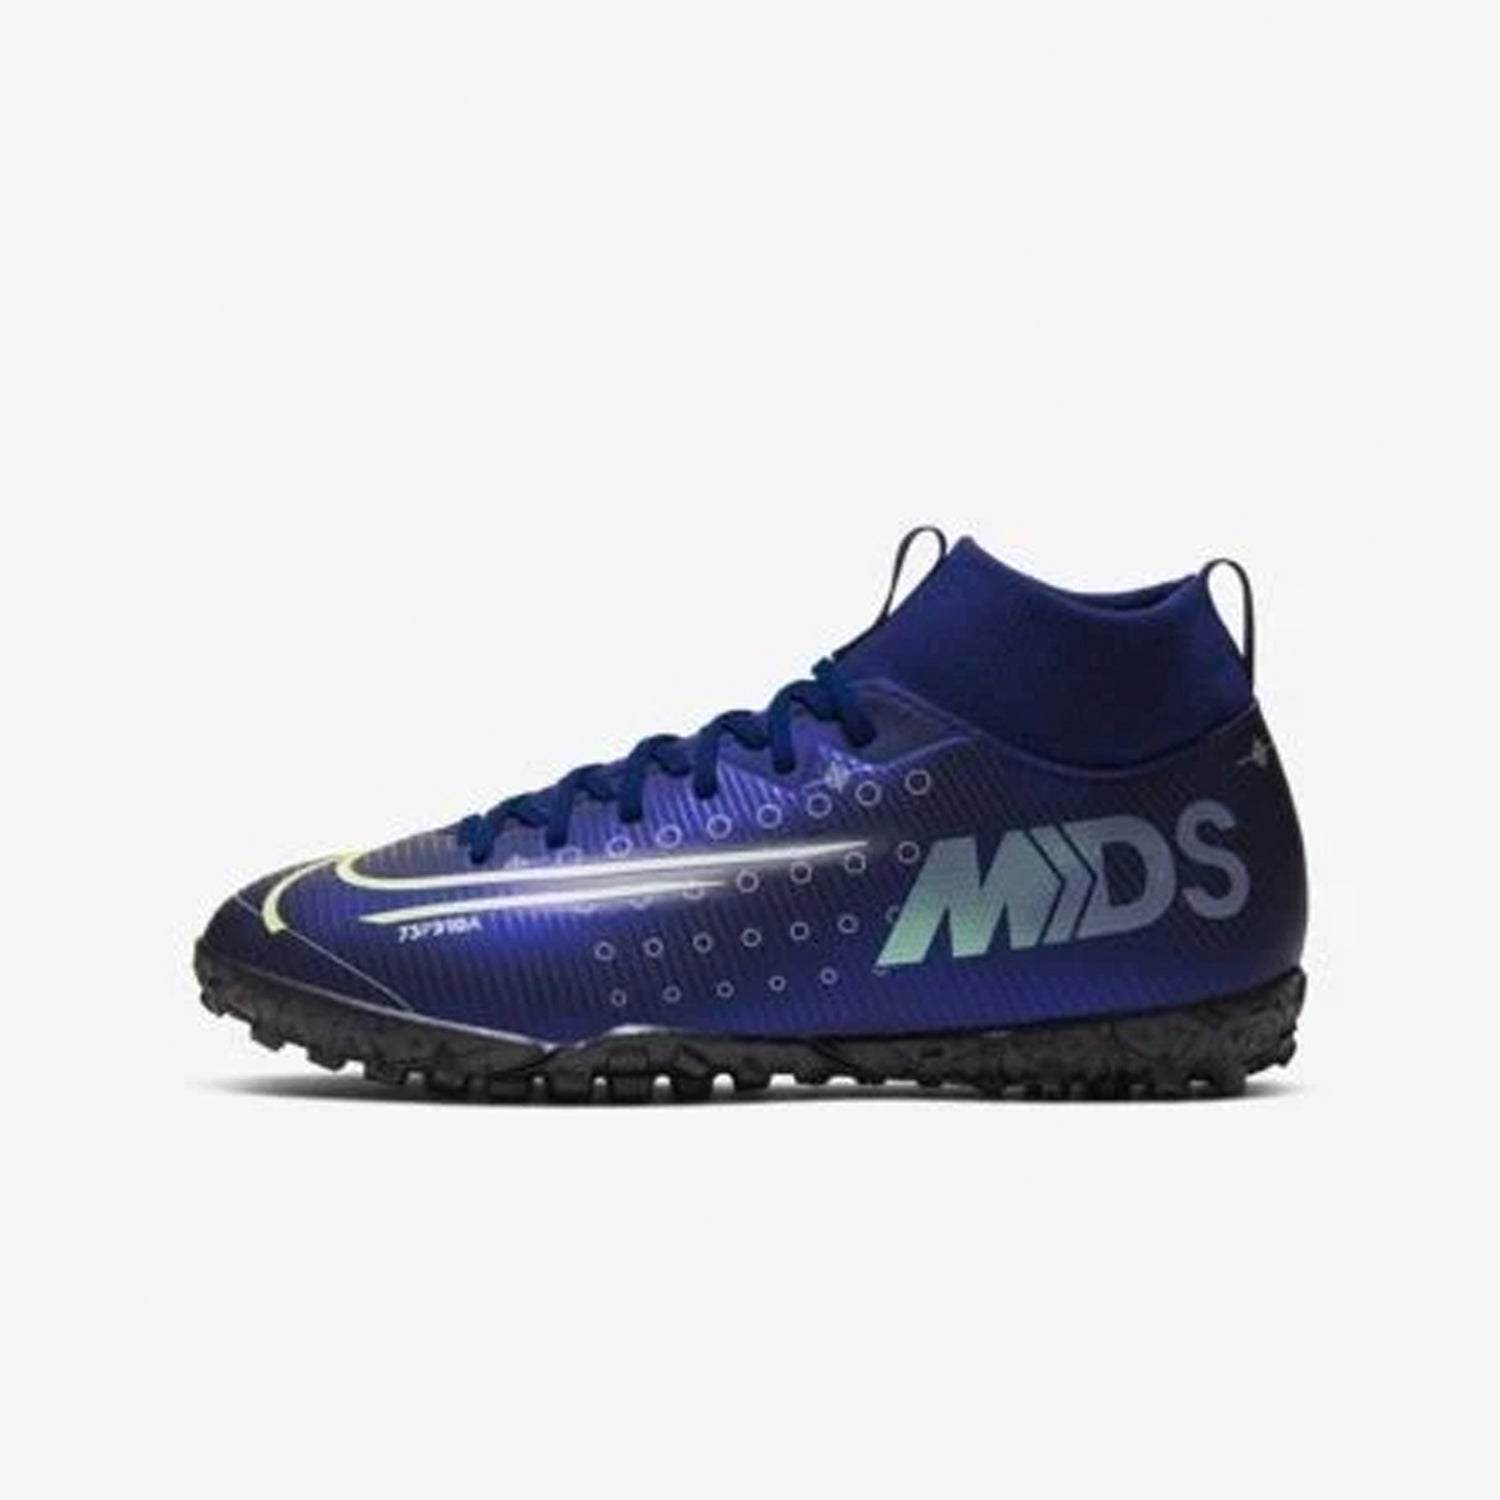 Kids Mercurial Superfly Academy MDS TF Turf Soccer Shoes